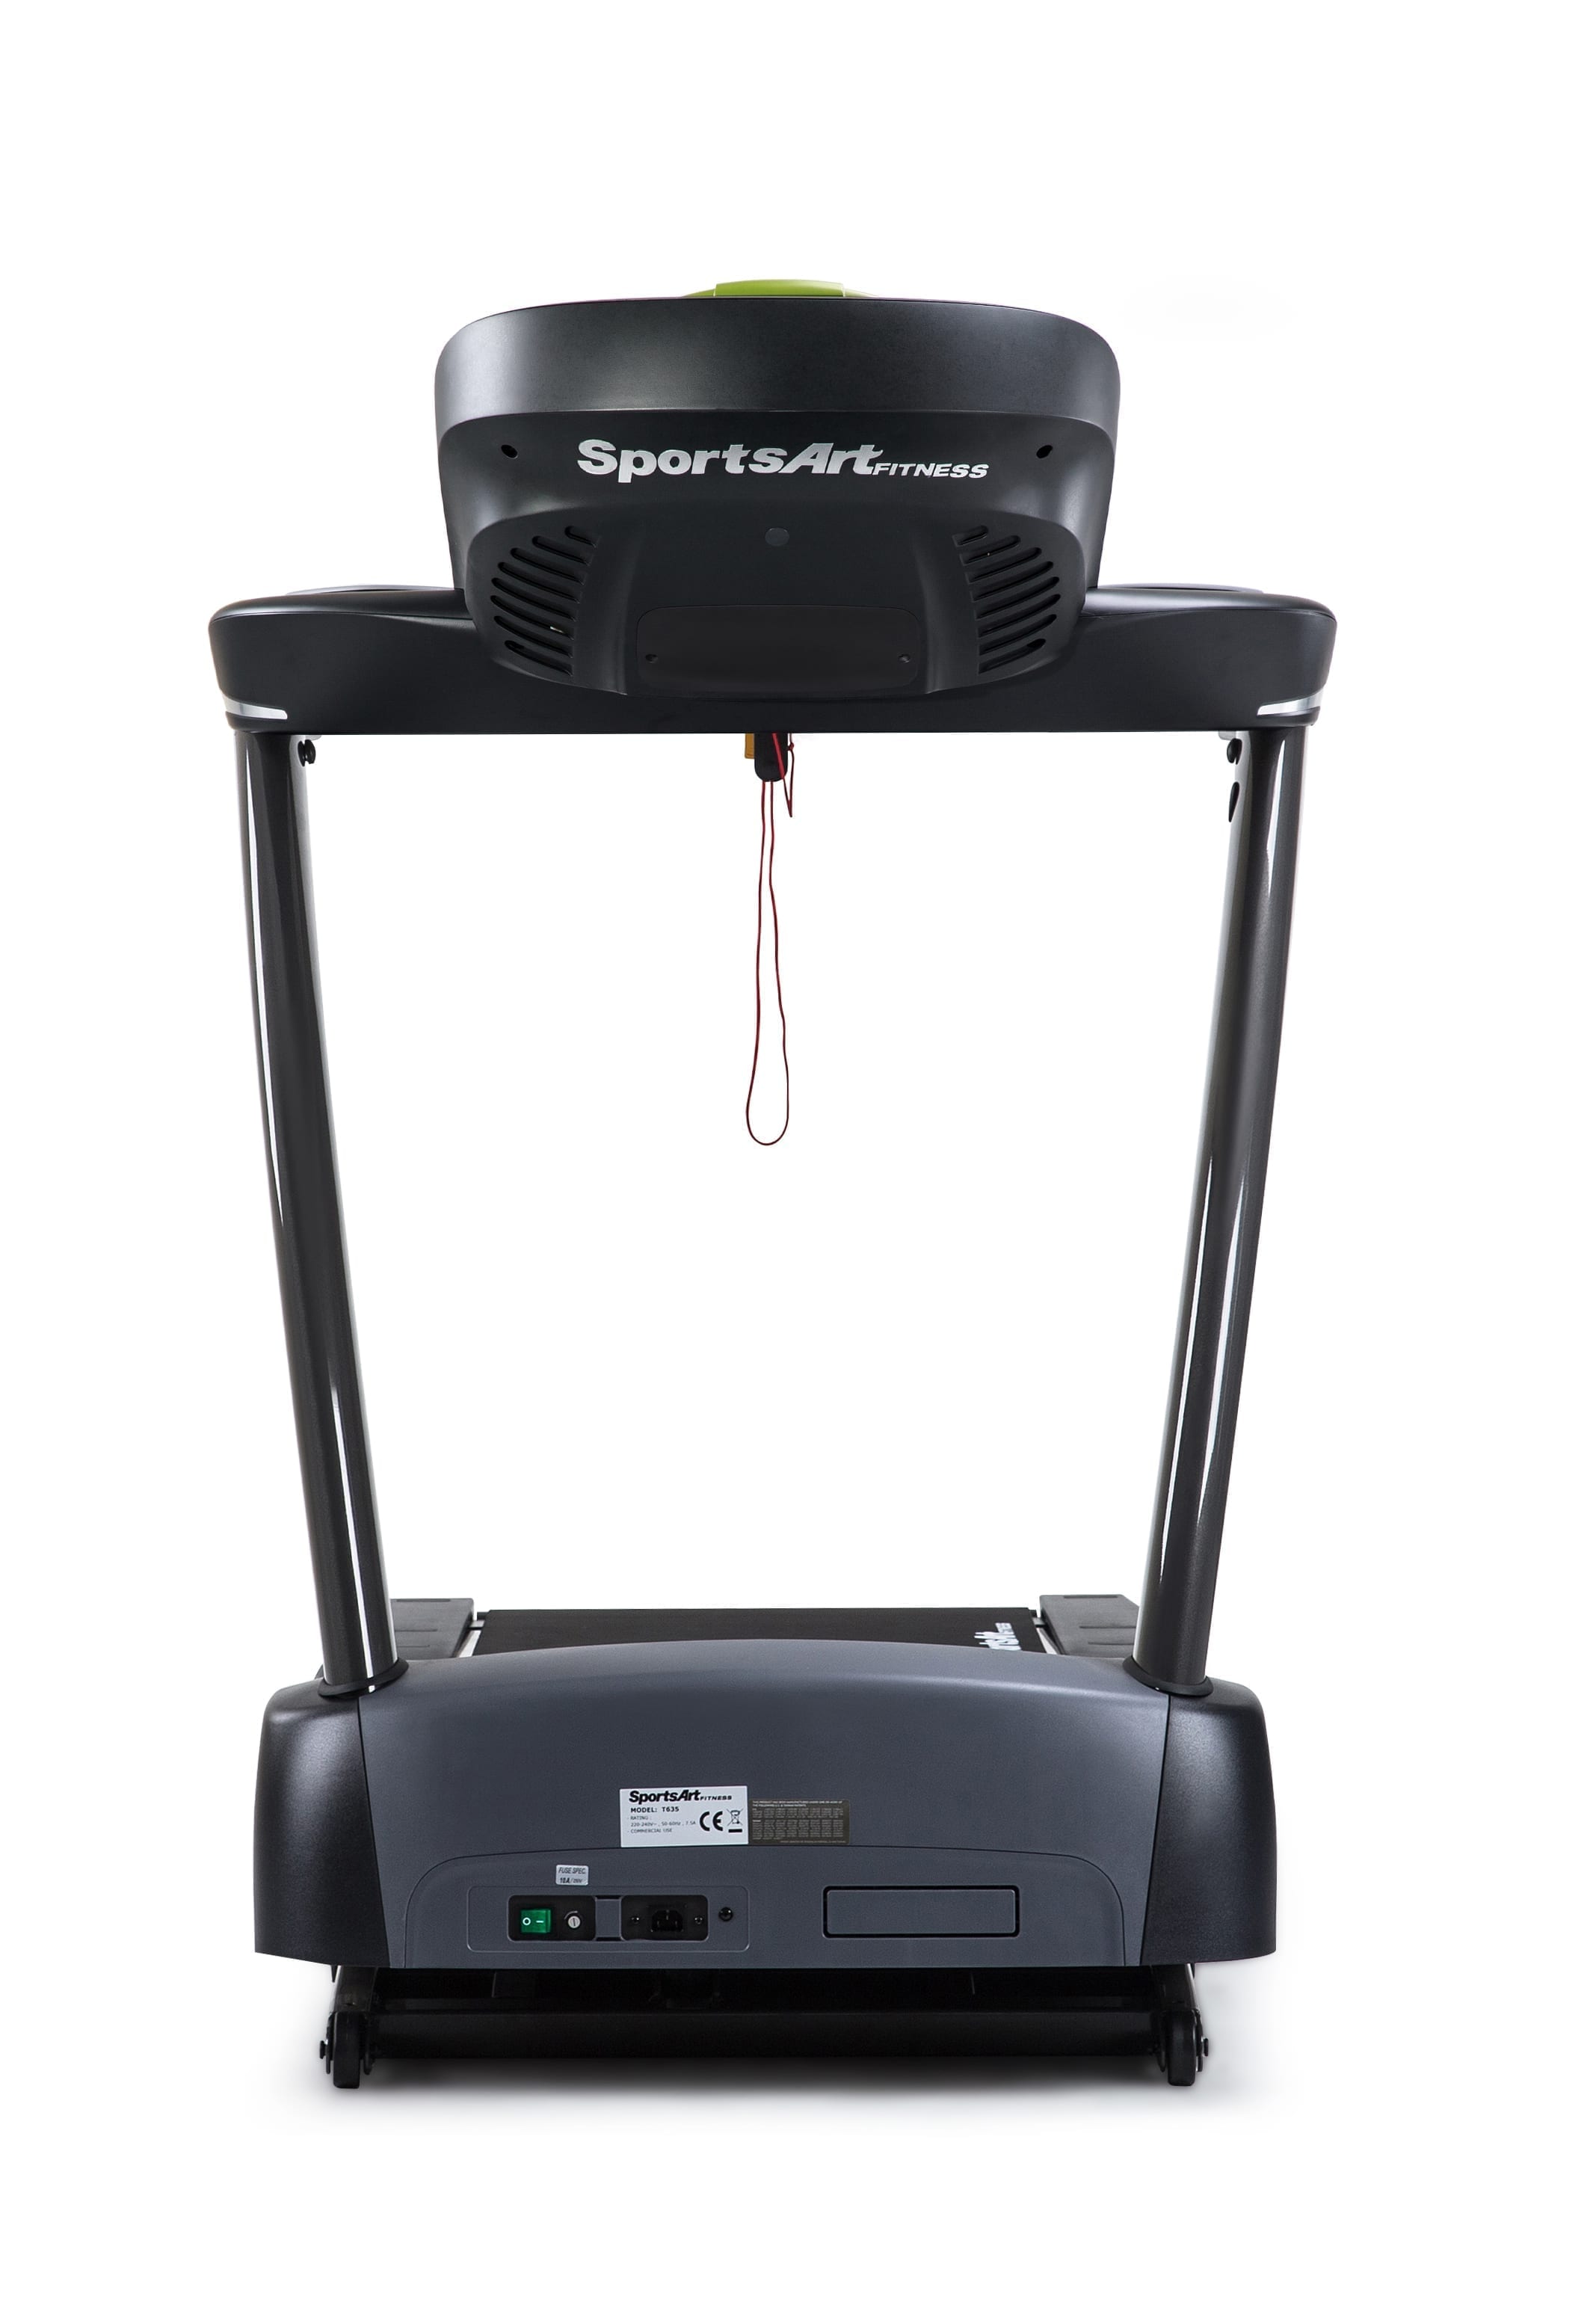 SportsArt Foundation Ac Motor Treadmill T635A front facing view